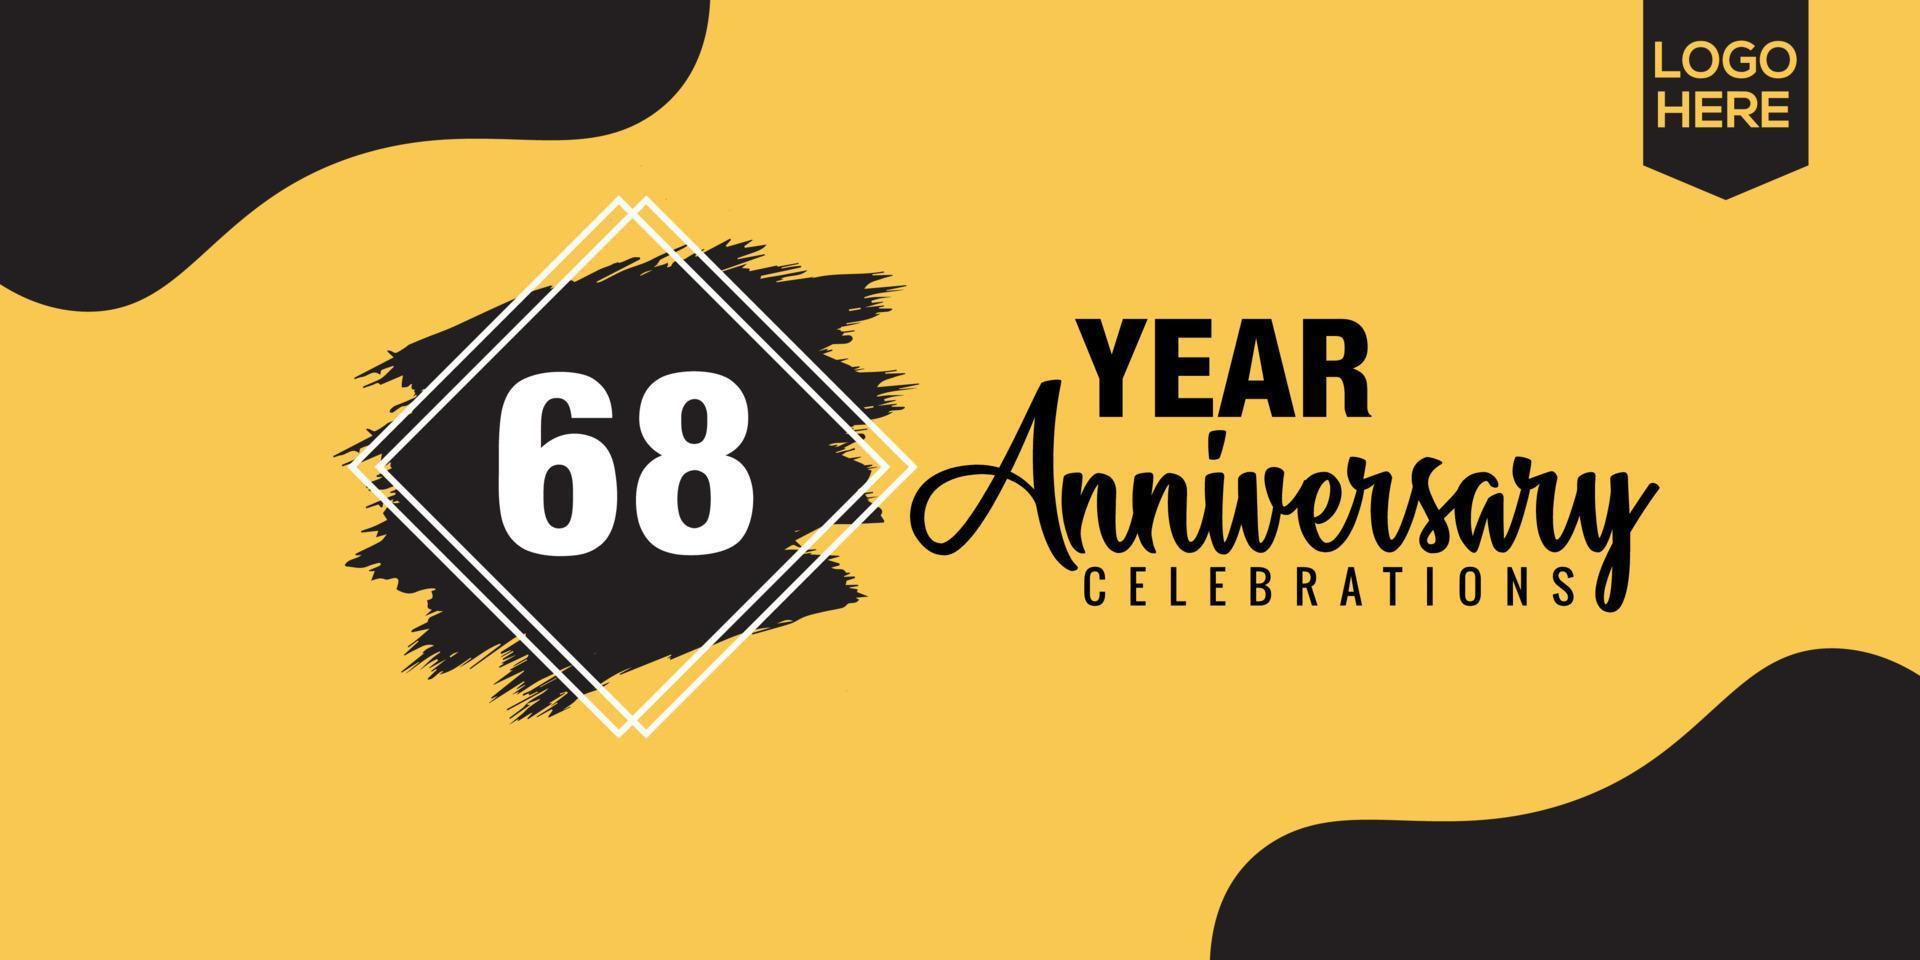 68th years anniversary celebration logo design with black brush and yellow color with black abstract vector illustration